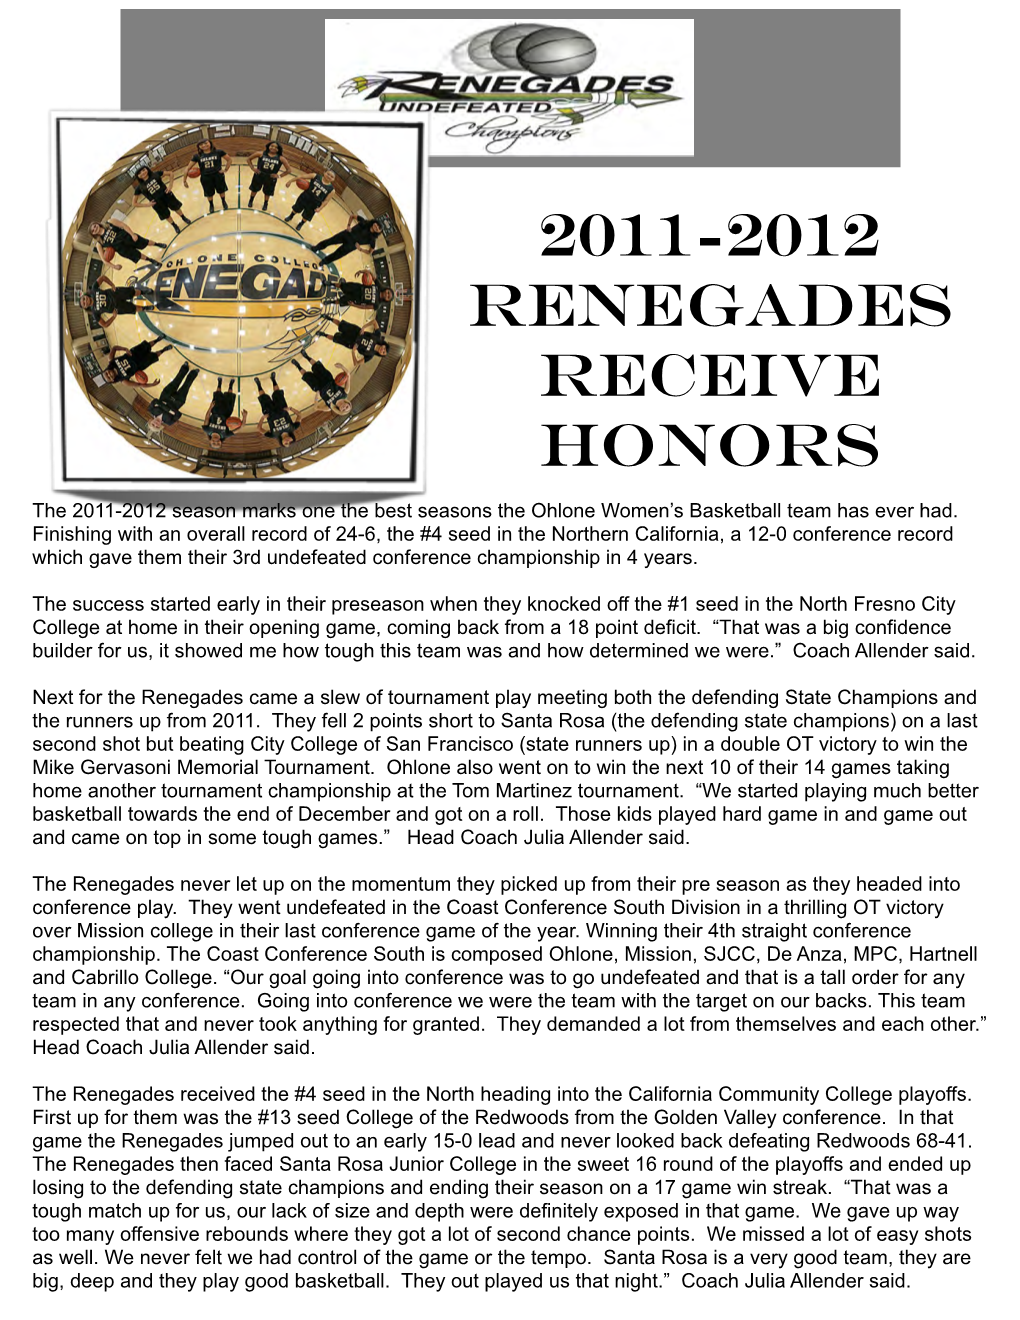 Women's Basketball 2011-2012 Receive Honors